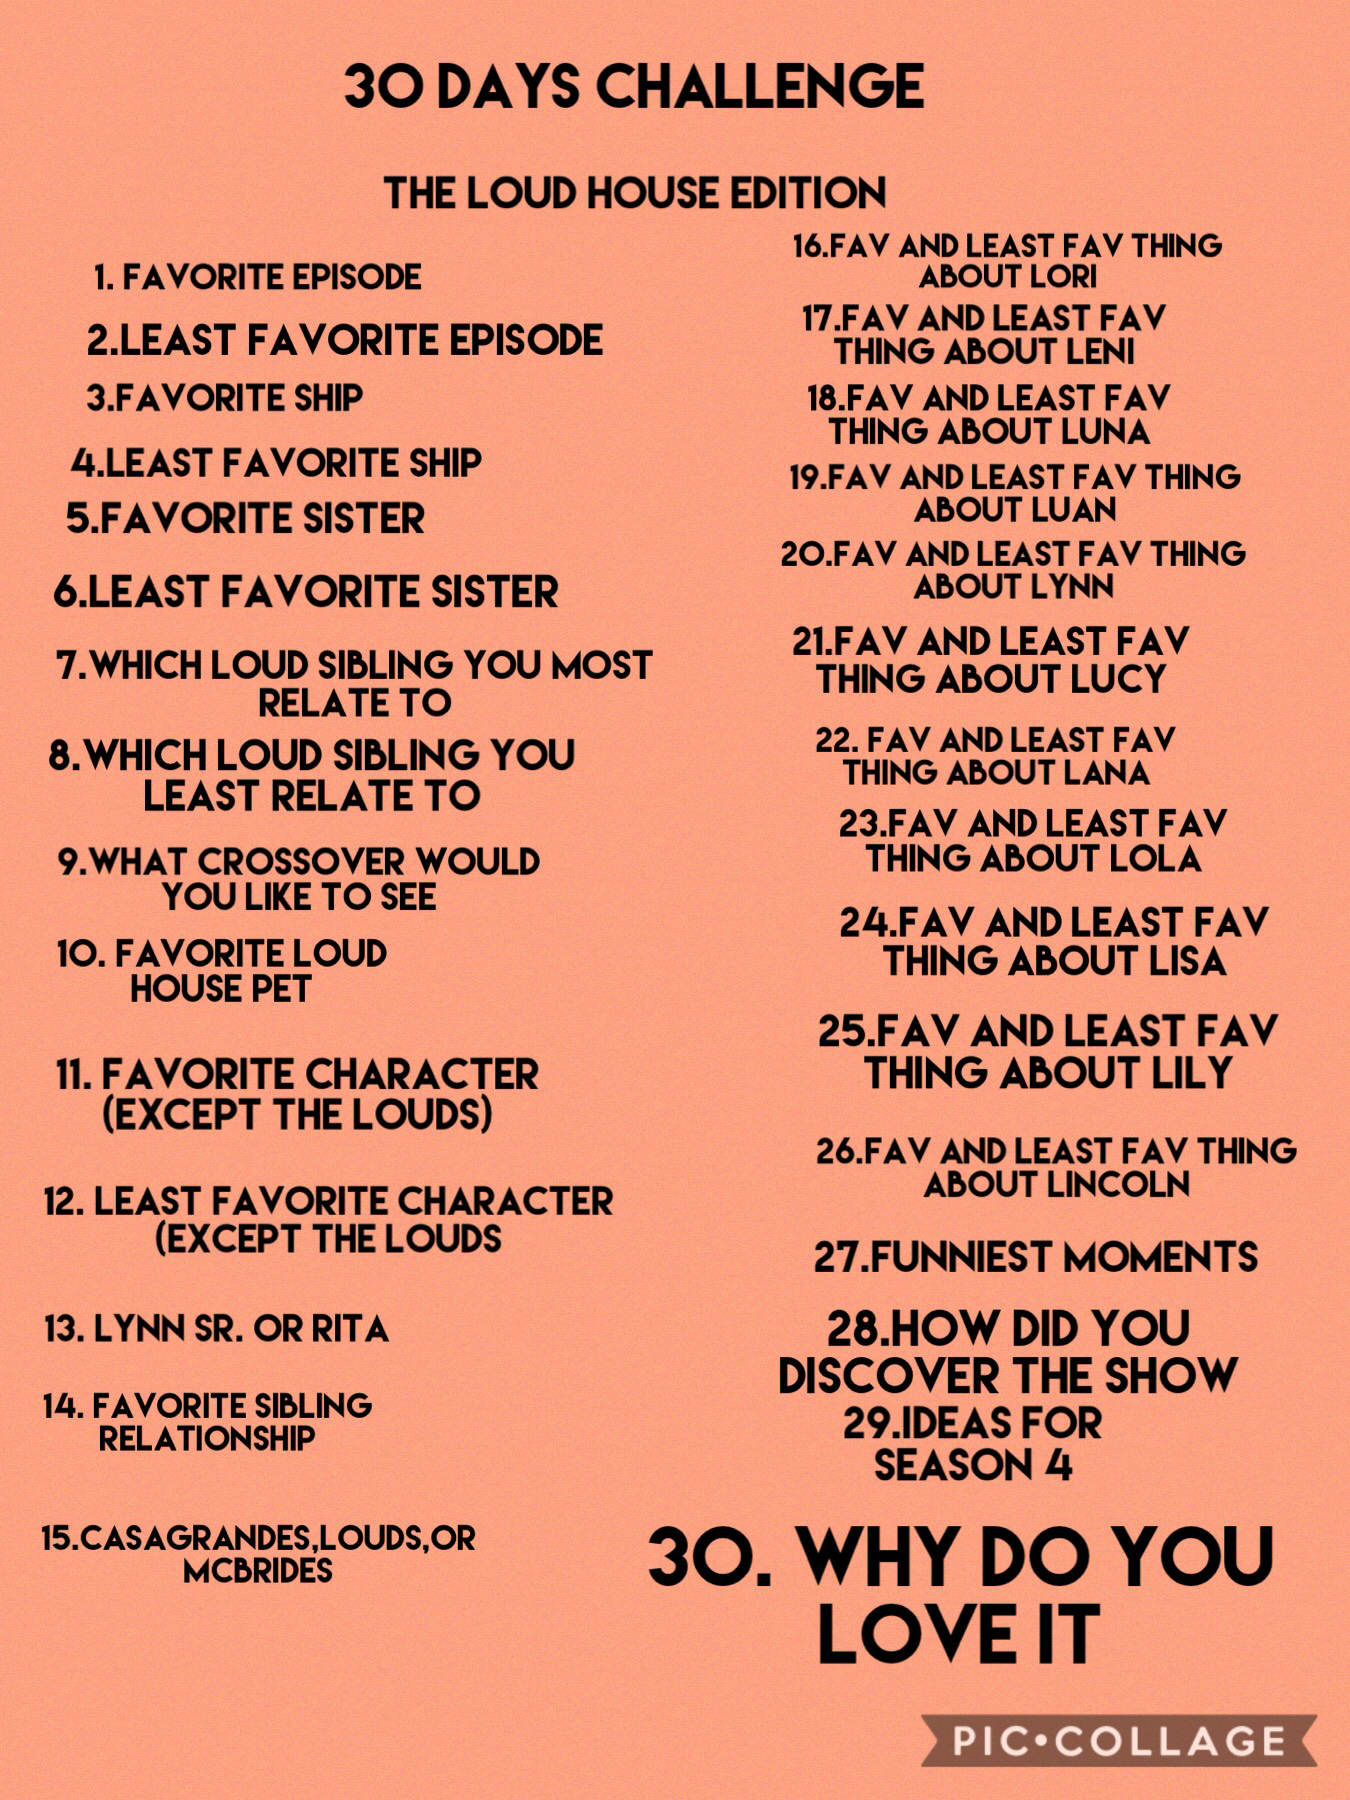 Phew! So this is the 30 days challenge and I’ll start right NOW and answer the first question!